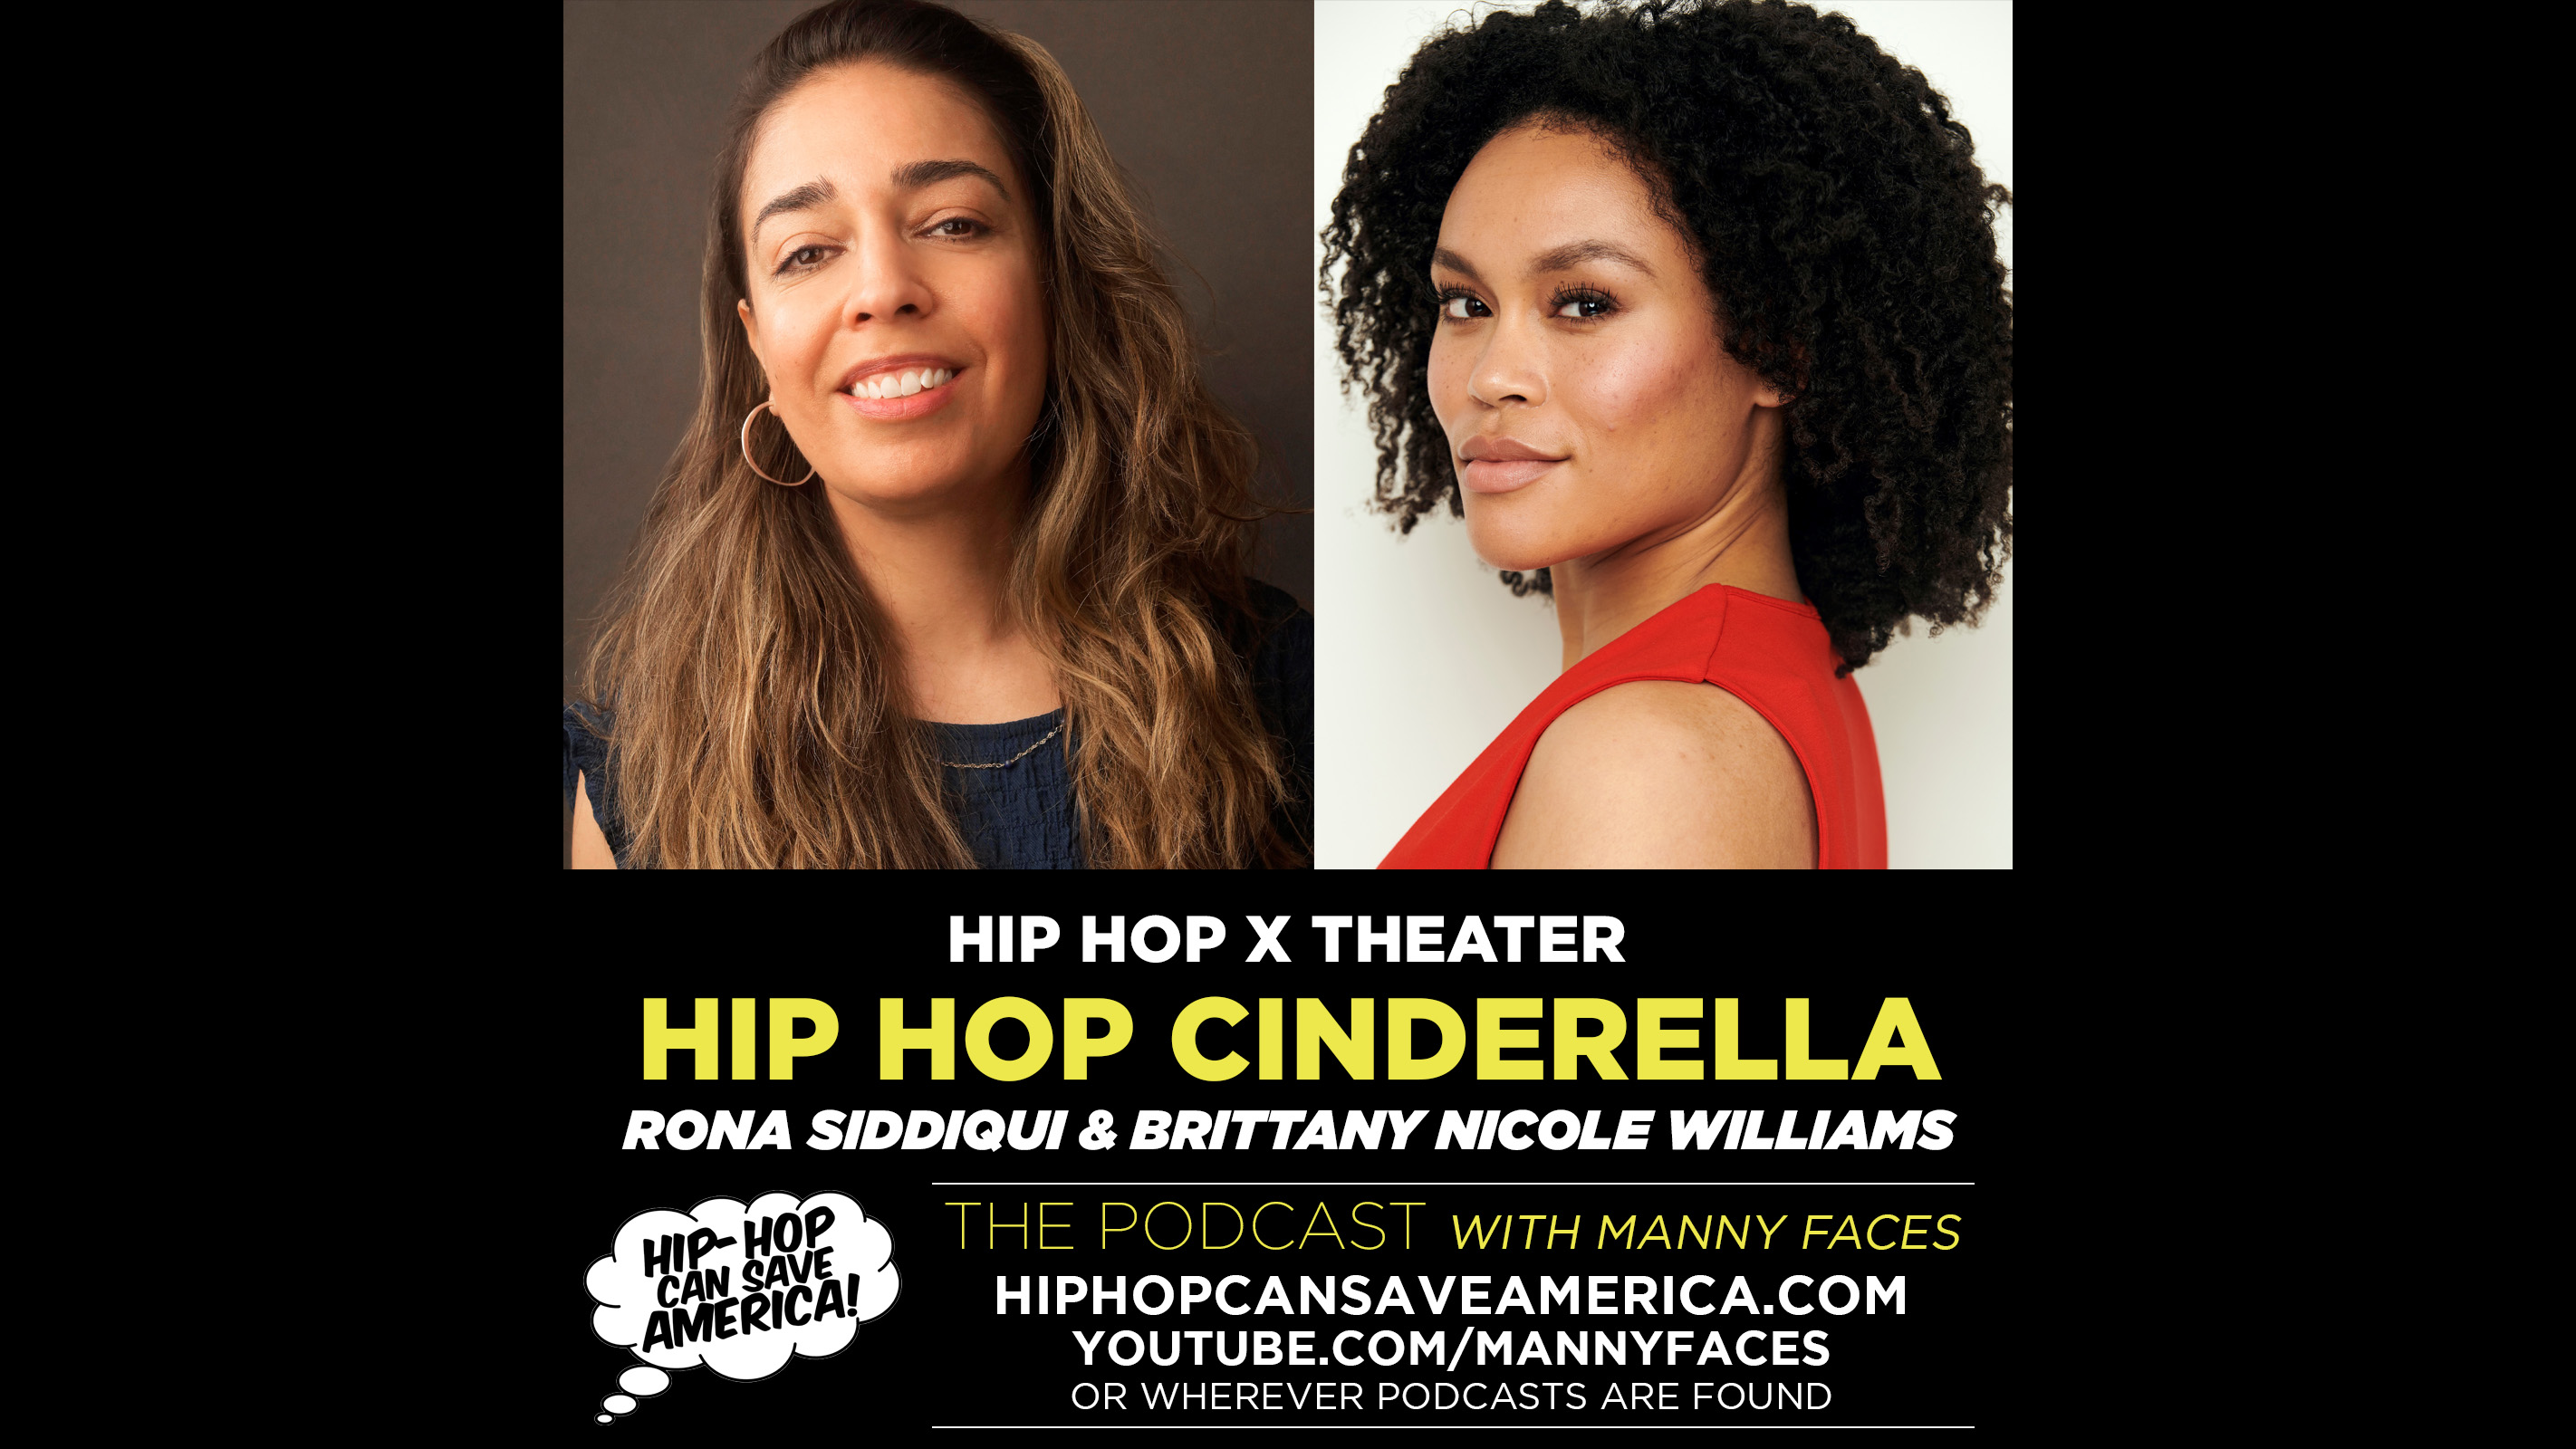 Podcast episode art. Headshots of two women - one on the left is Rona Siddiqui, one on the right is Brittany Nicole Williams. The Podcast episode text states "Hip Hop x Theater: Hip Hop Cinderella - Rona Siddiqui & Brittany Nicole Williams"